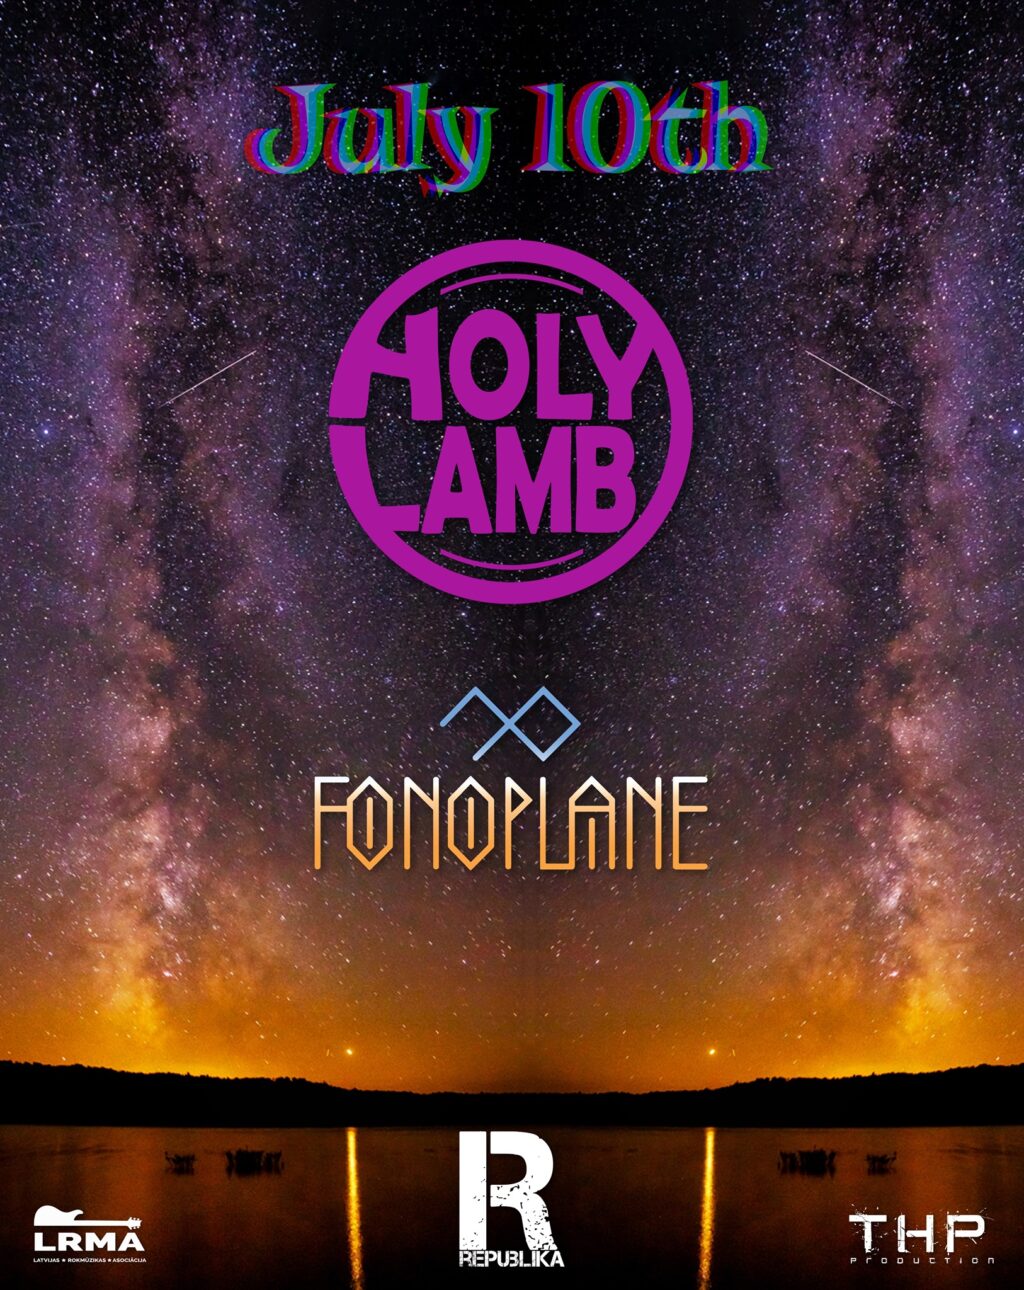 Progressive Rock Night with Holy Lamb and Fonoplane